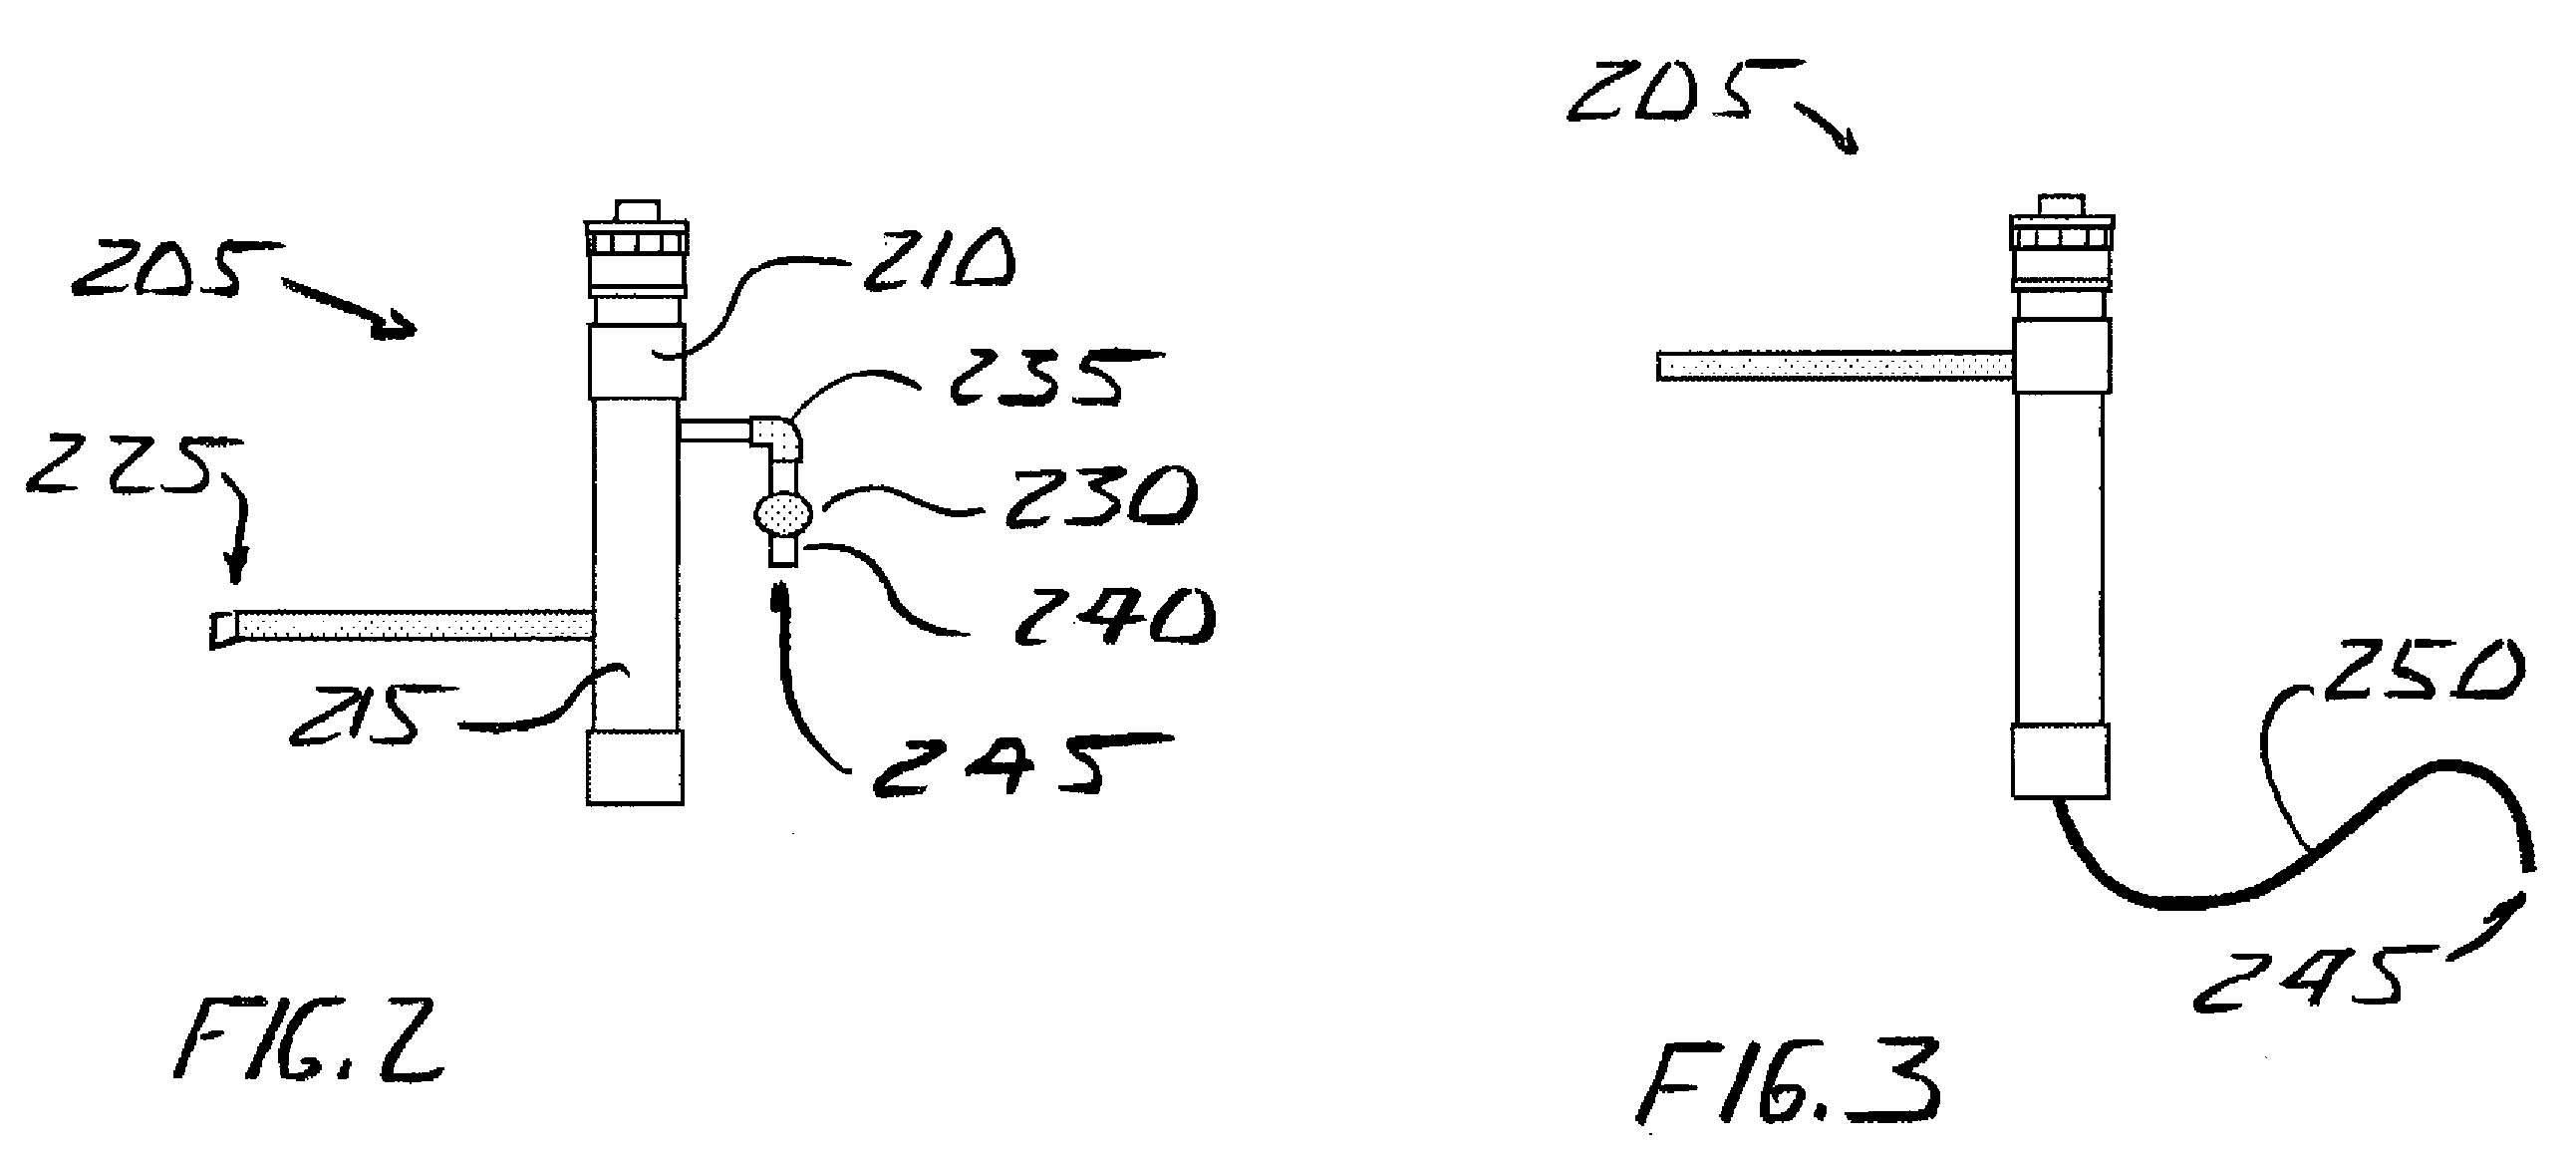 Apparatus for Dosing a Wastewater Treatment System